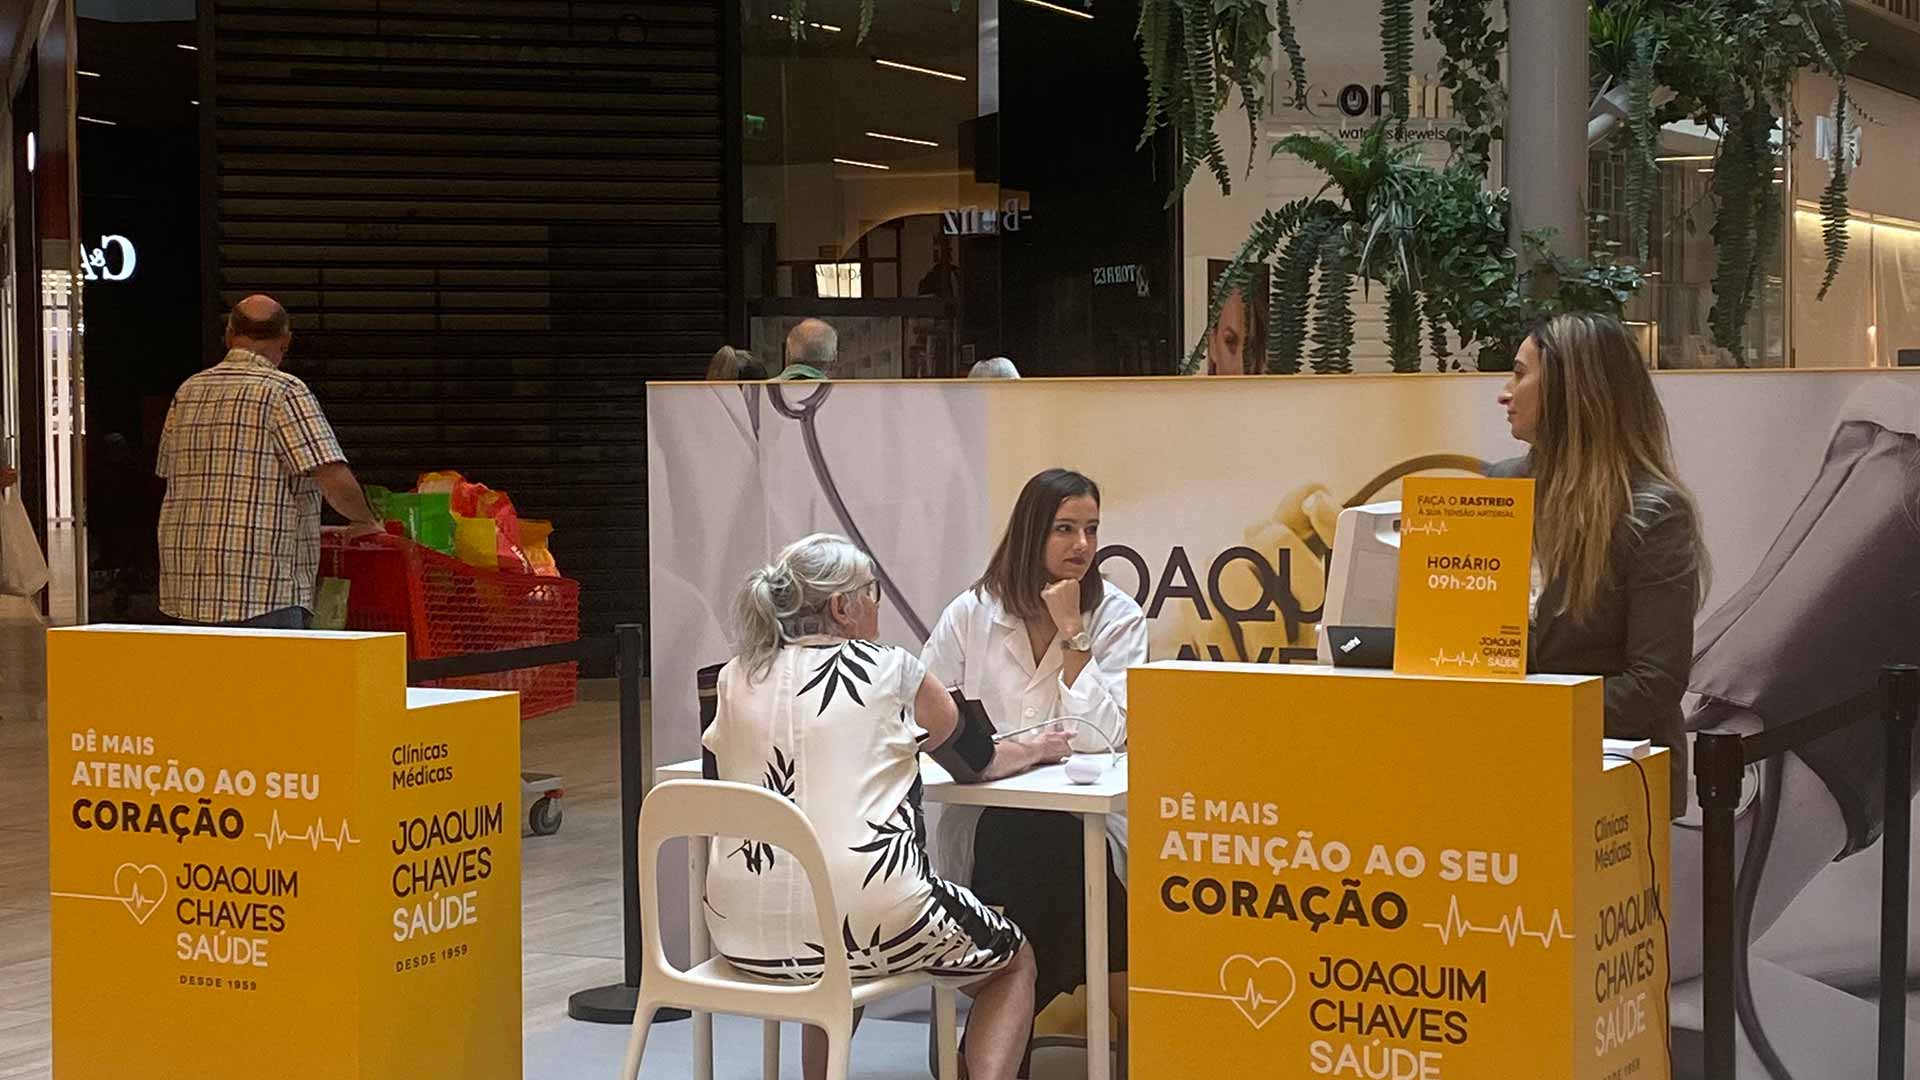 Nurse taking a woman's blood pressure at the Blood Pressure Screening Action carried out by Joaquim Chaves Saúde